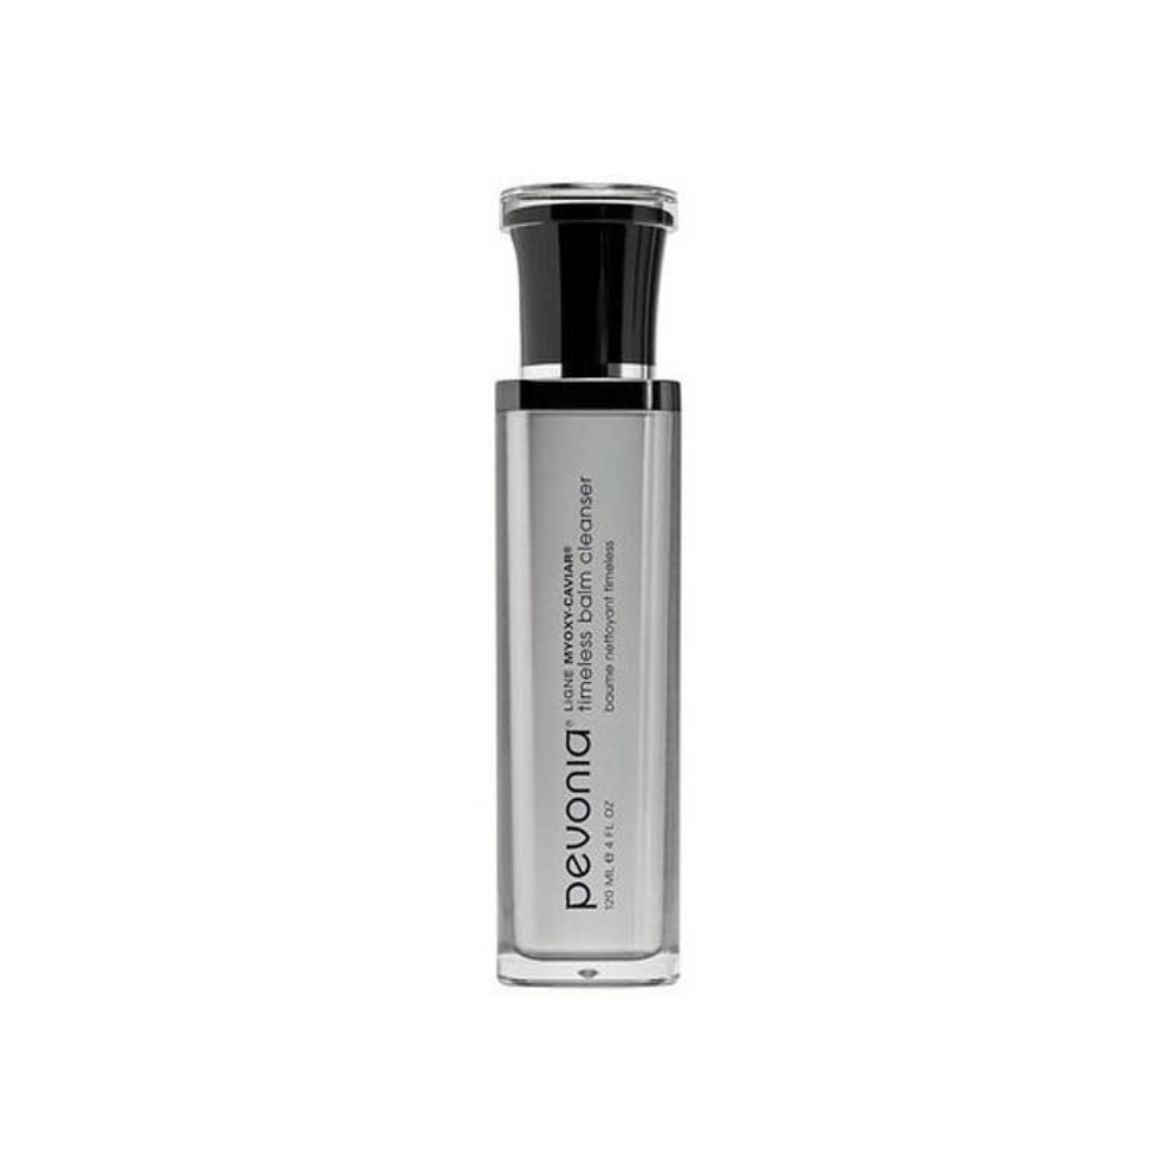 Image of Pevonia Timeless Balm Cleanser (120ml)